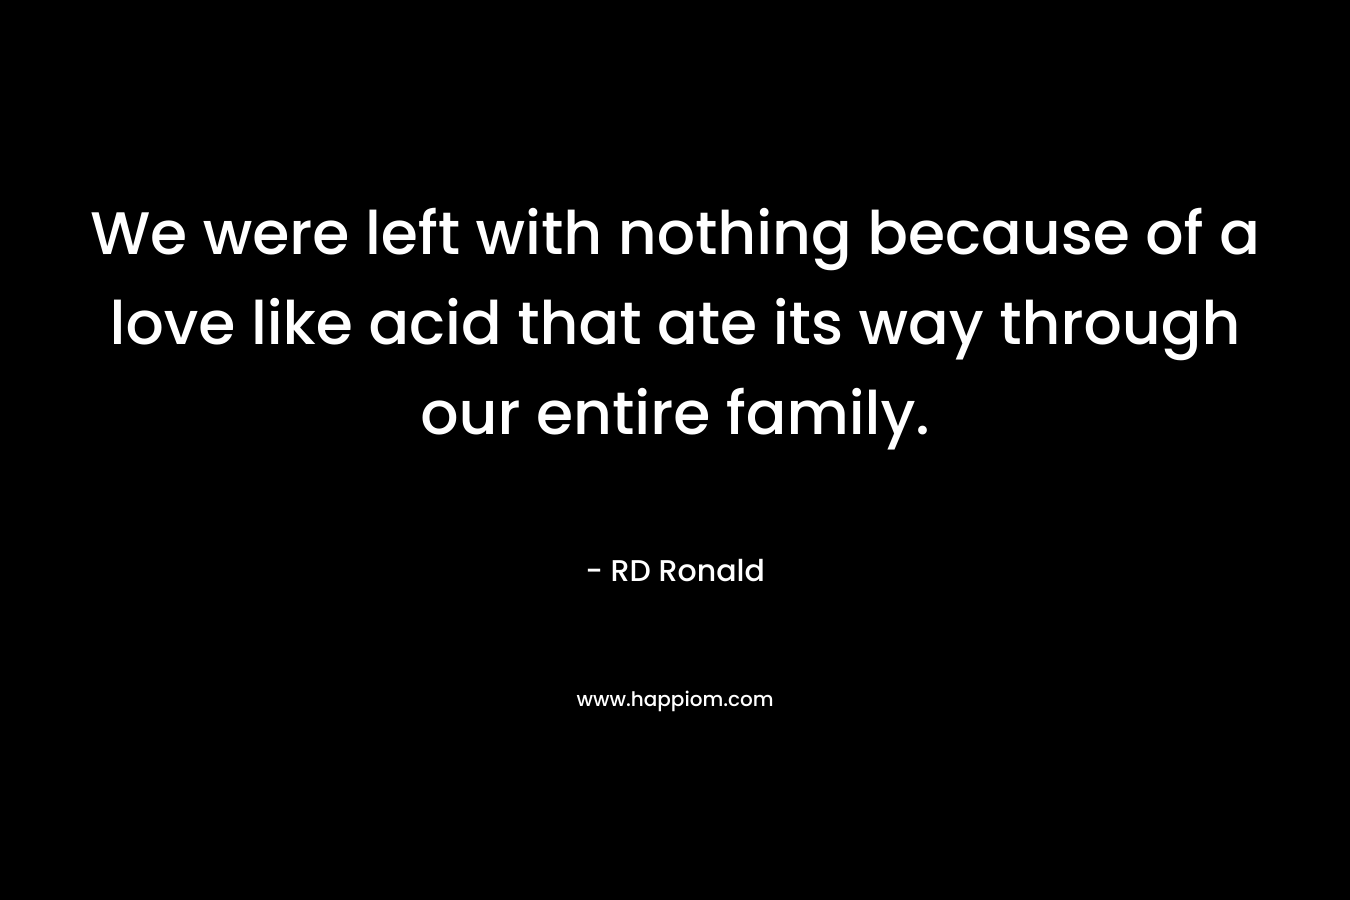 We were left with nothing because of a love like acid that ate its way through our entire family. – RD Ronald